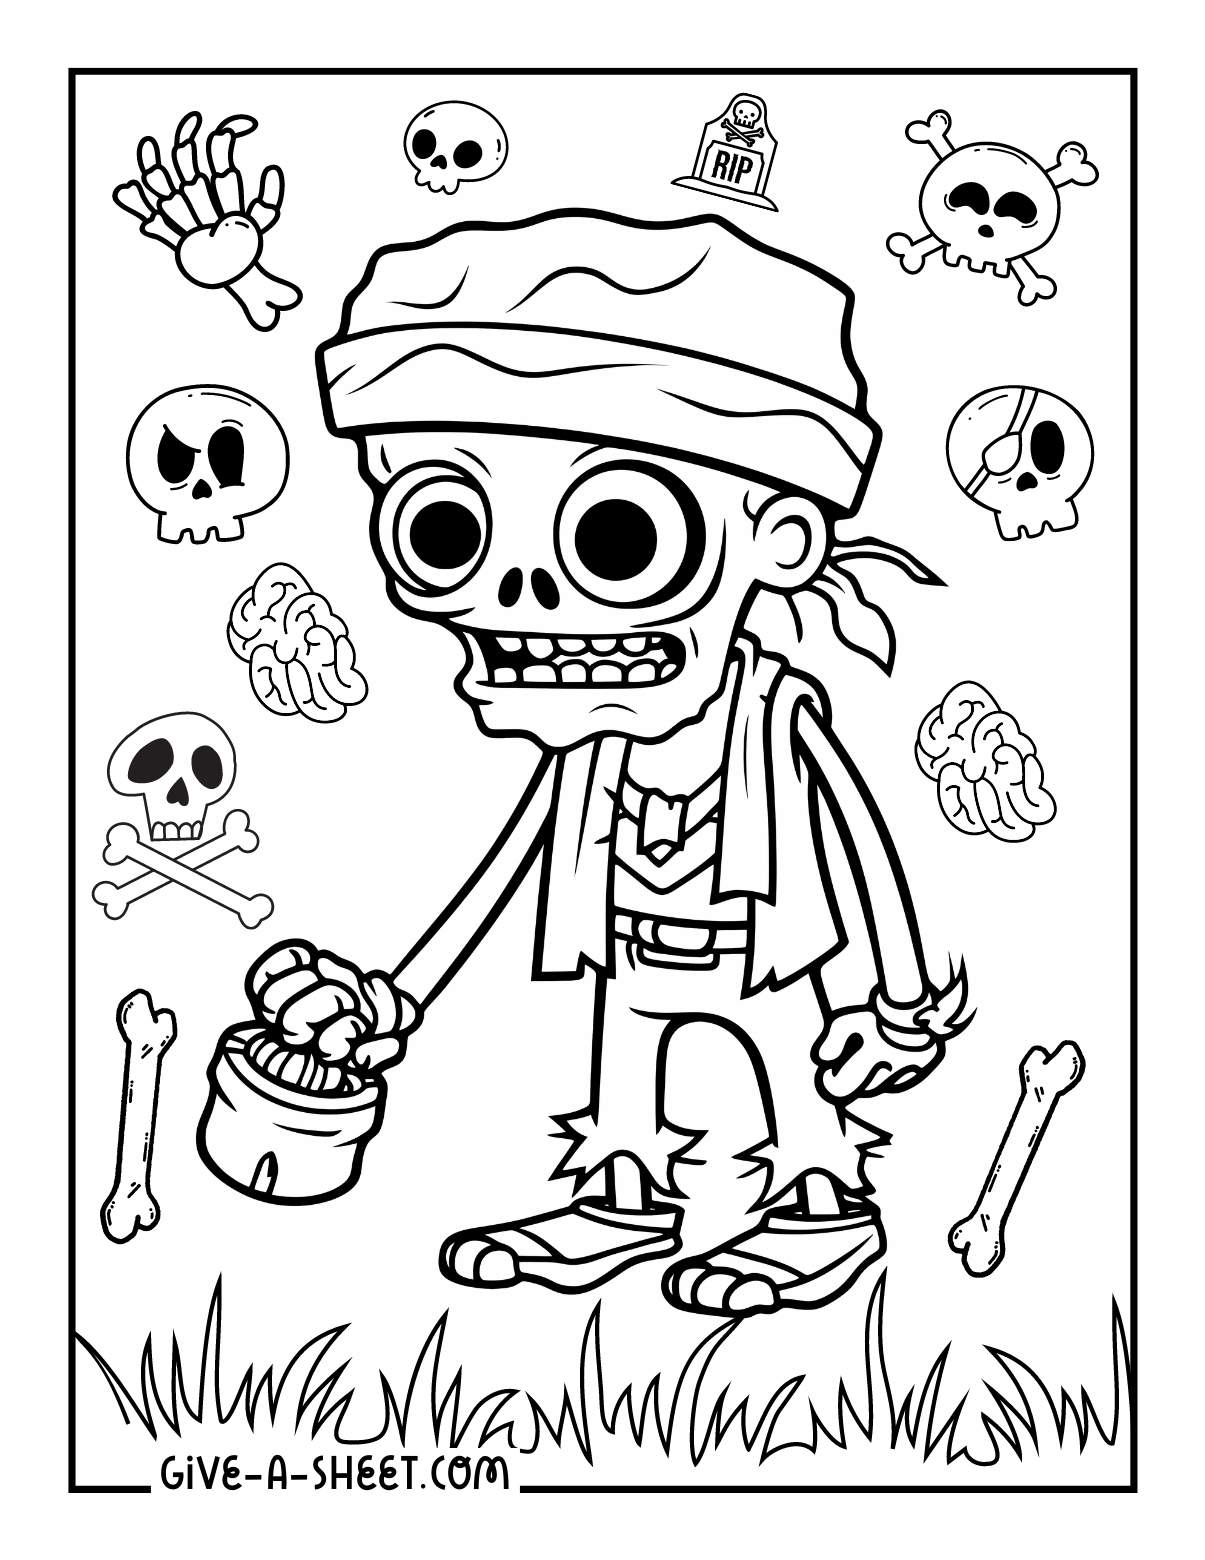 Zombie pirate coloring page for kids.